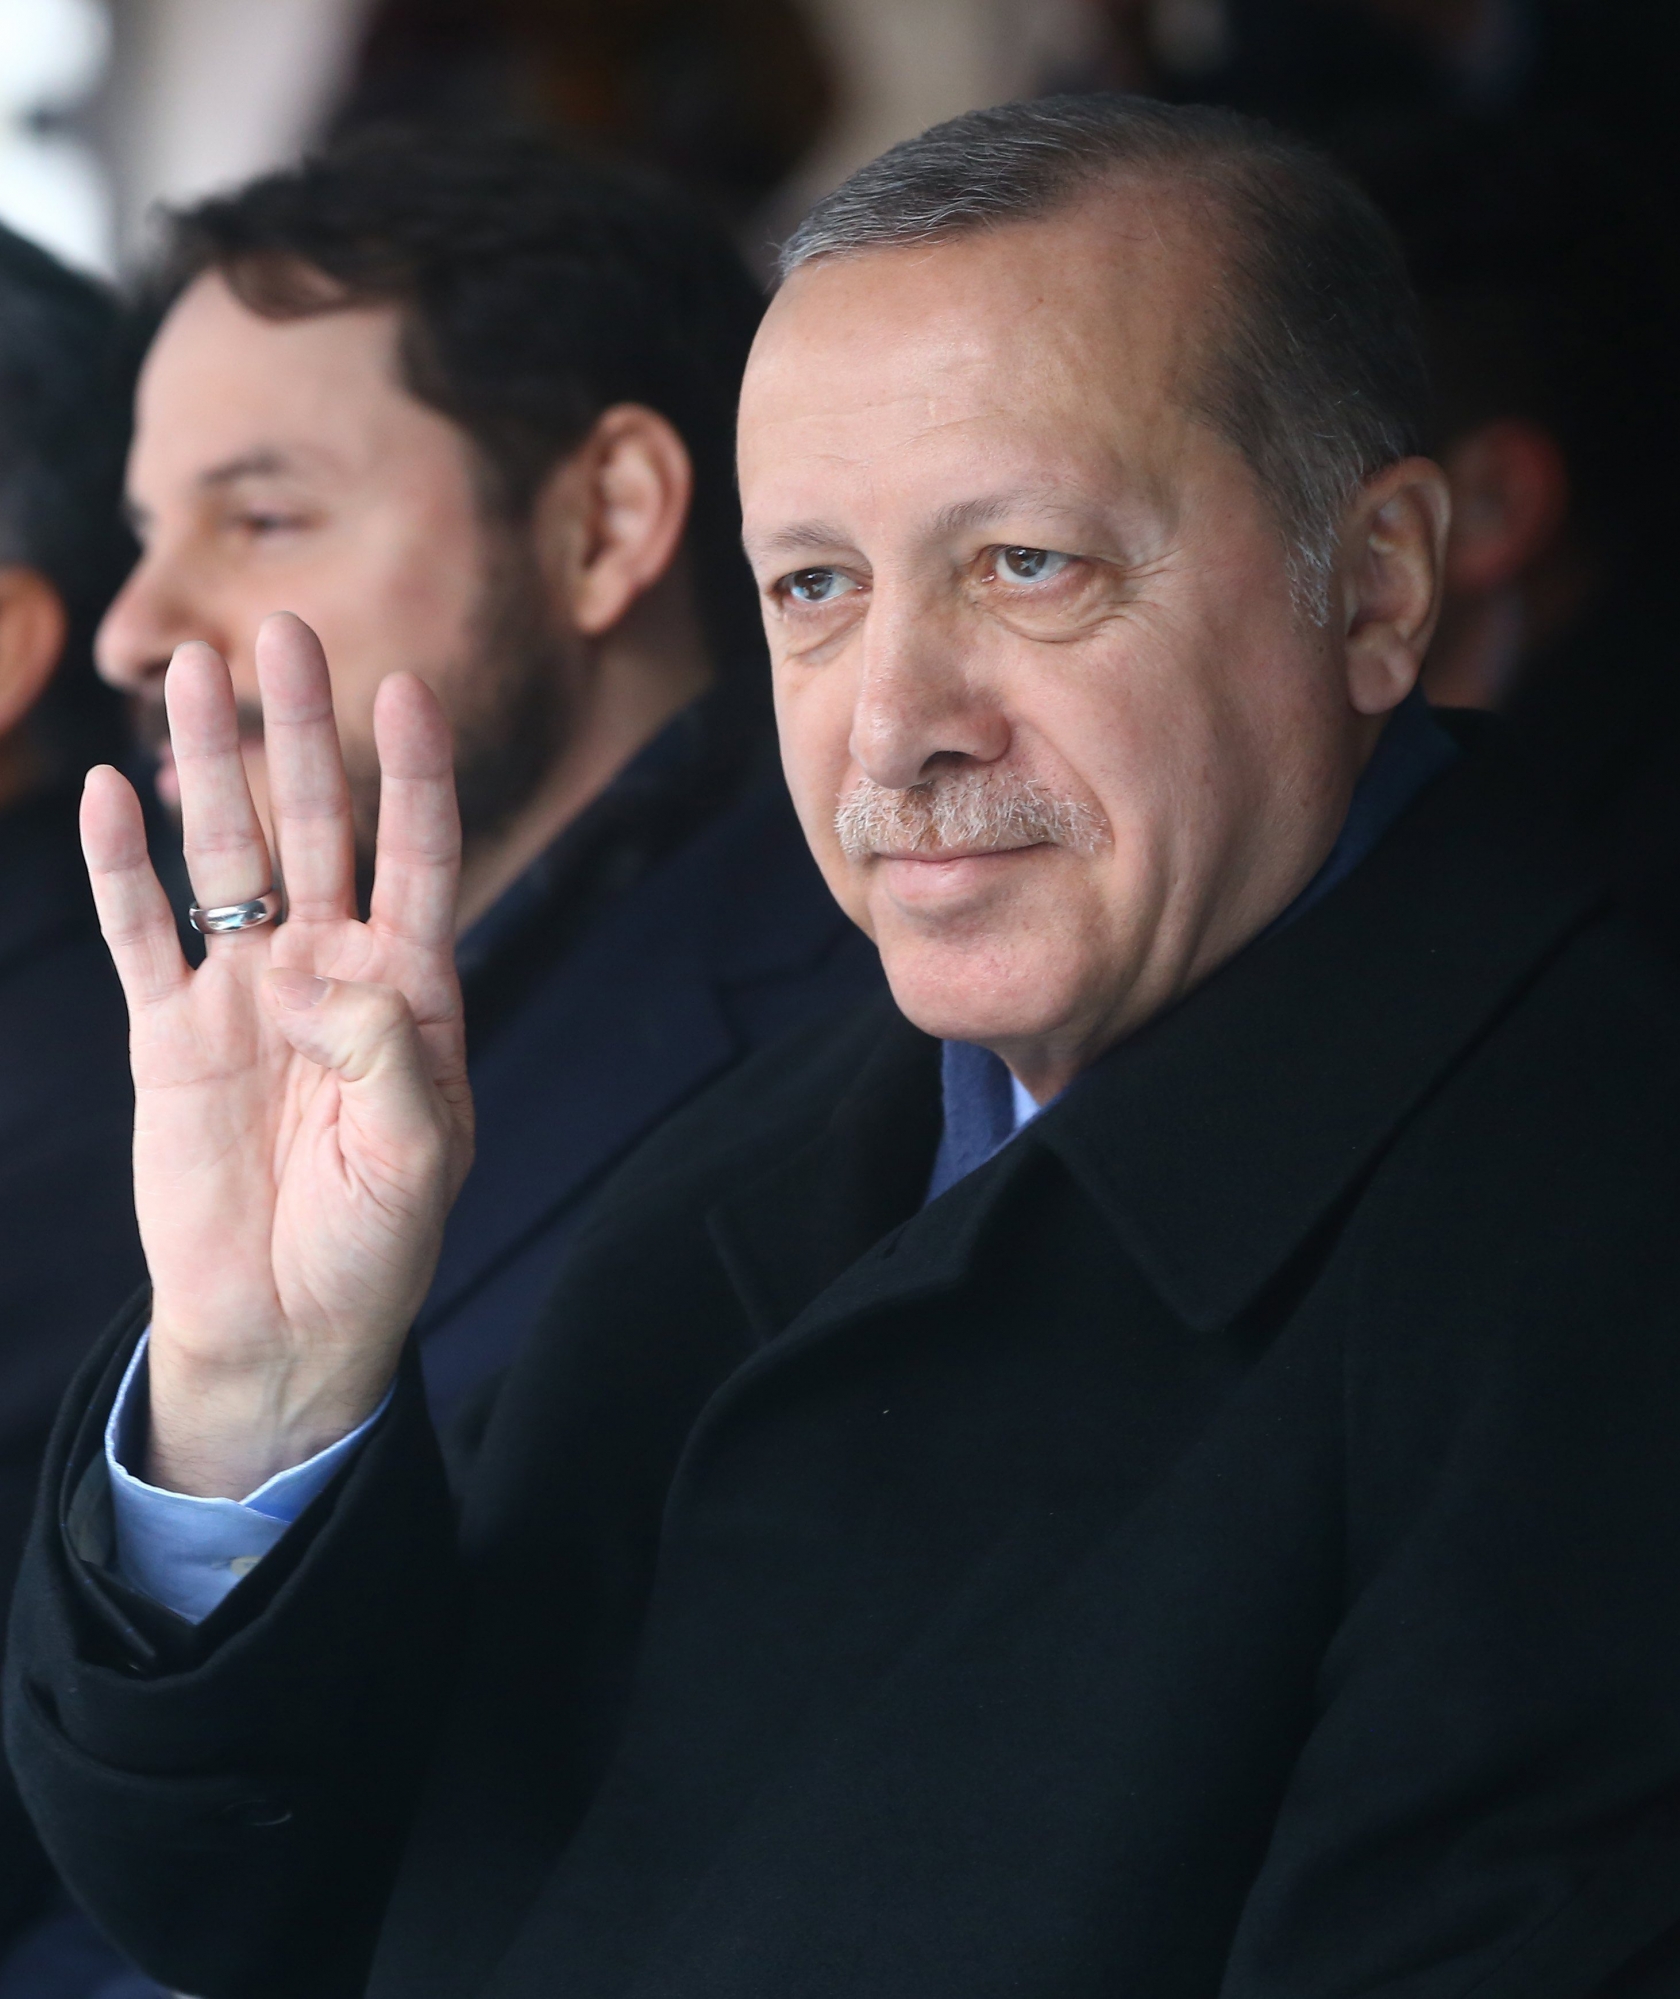 epa05842476 A handout picture provided by The Turkish President Press office shows, Turkish President Recep Tayyip Erdogan (L) waving to his supporters during the opening ceremony of facilities in Istanbul, Turkey, 11 March 2017. Turkish parliament on 21 January approved a reform of the constitution to change the country's parliamentarian system of governance into a presidential one, which the opposition denounced as giving more power to Turkish president Recep Tayyip Erdogan. A referendum on the amendments is expected to be held in April.  EPA/TURKISH PRESIDENT PRESS OFFICE HANDOUT  HANDOUT EDITORIAL USE ONLY/NO SALES TURKEY CONSTITUTION REFERENDUM